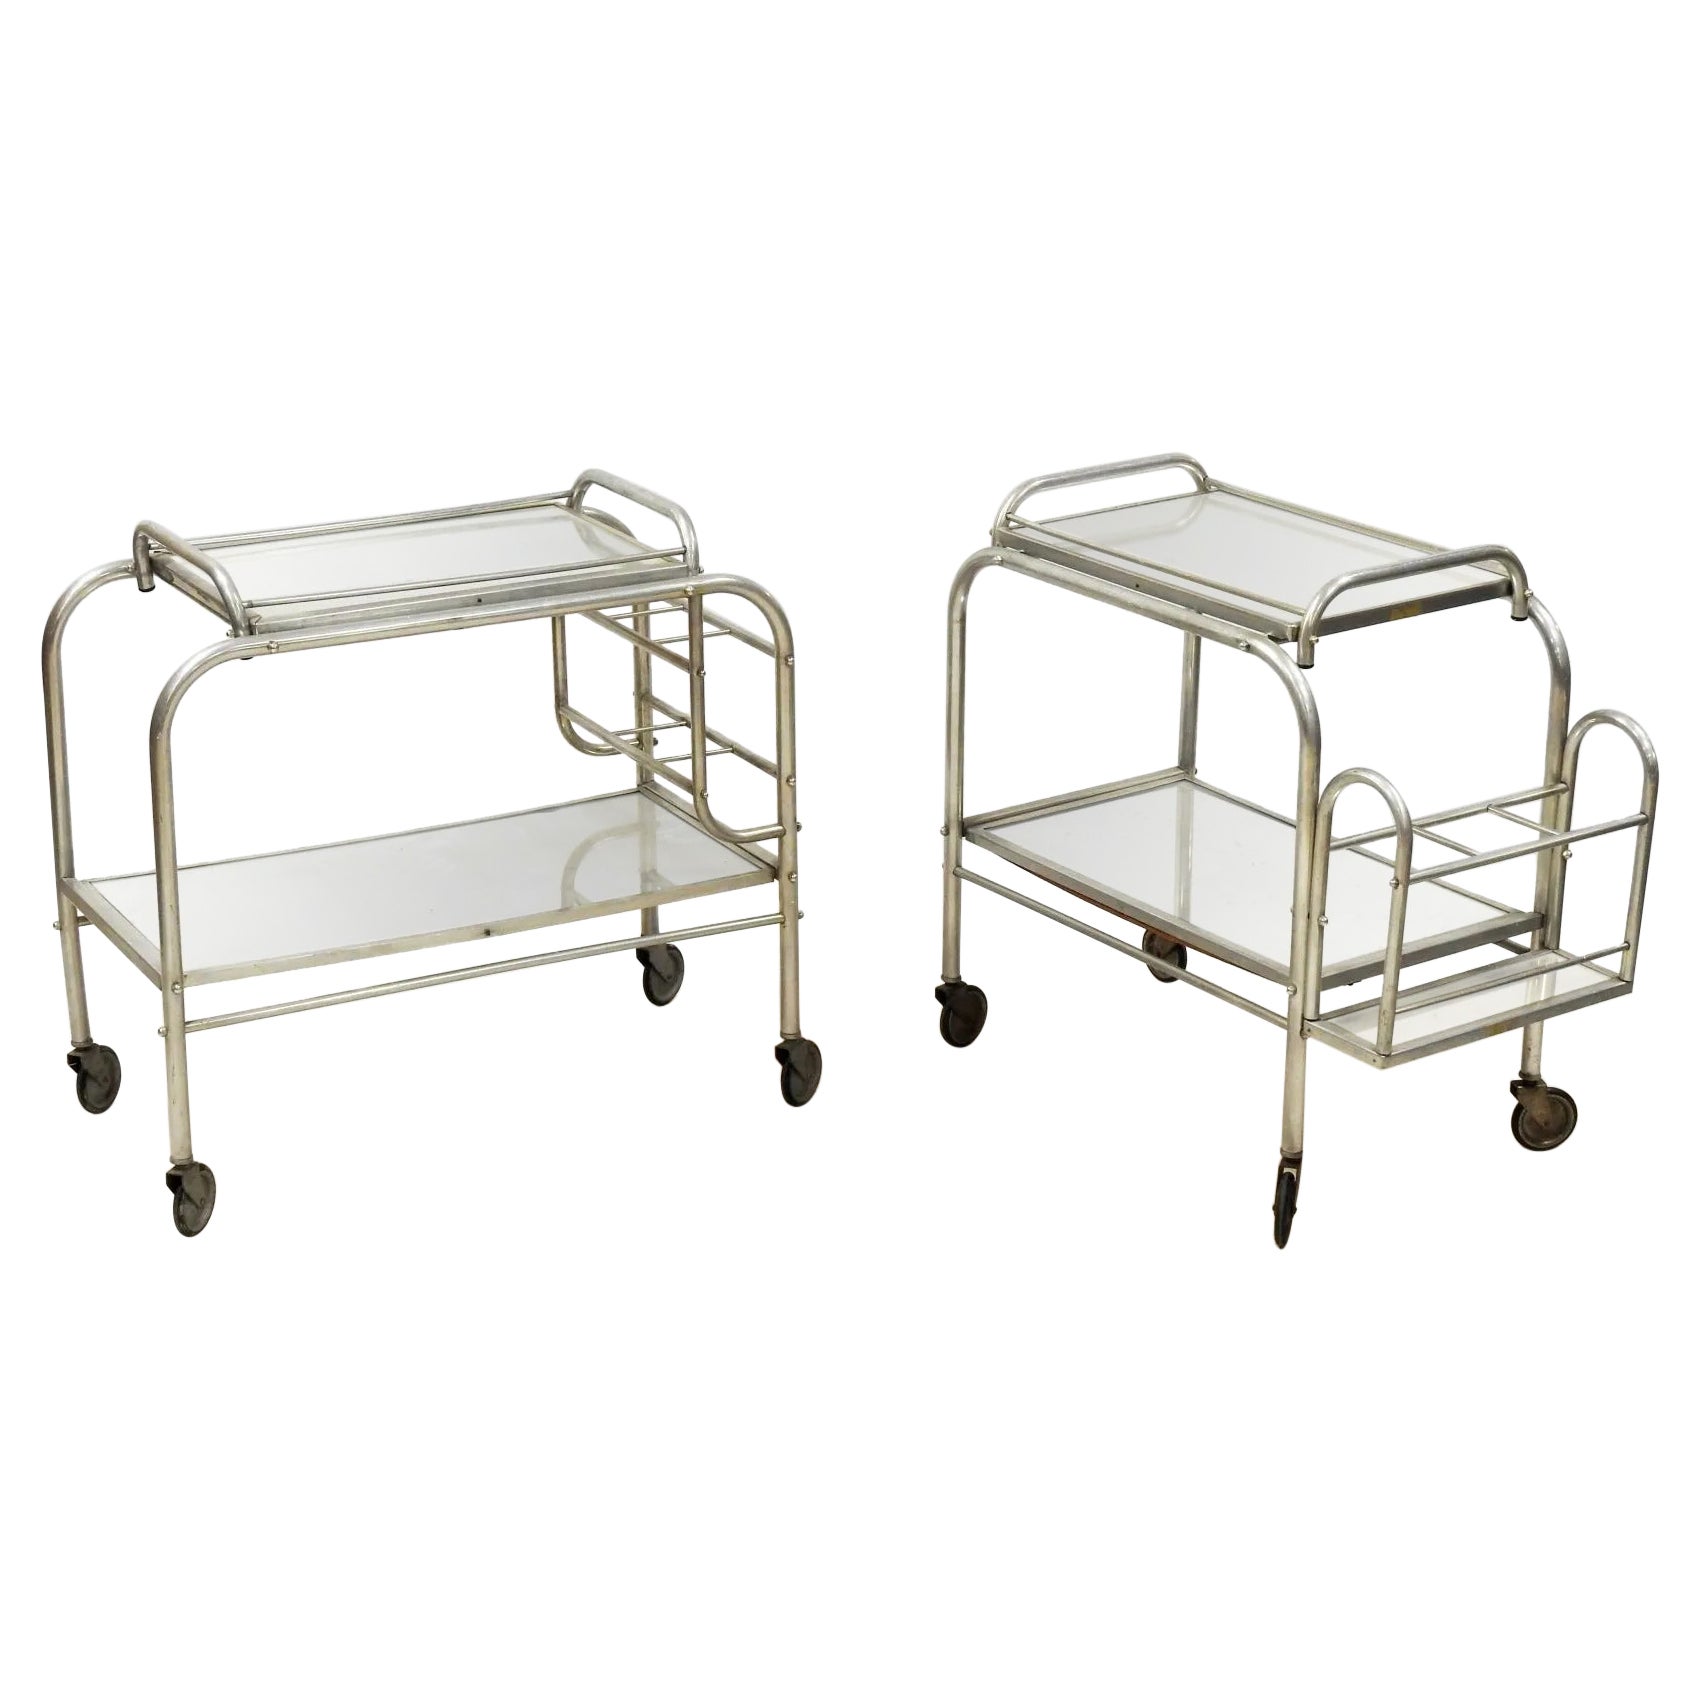 Jacques Adnet 'in the Style of' with 2 Trolleys That Can Make Pair, circa 1930 For Sale